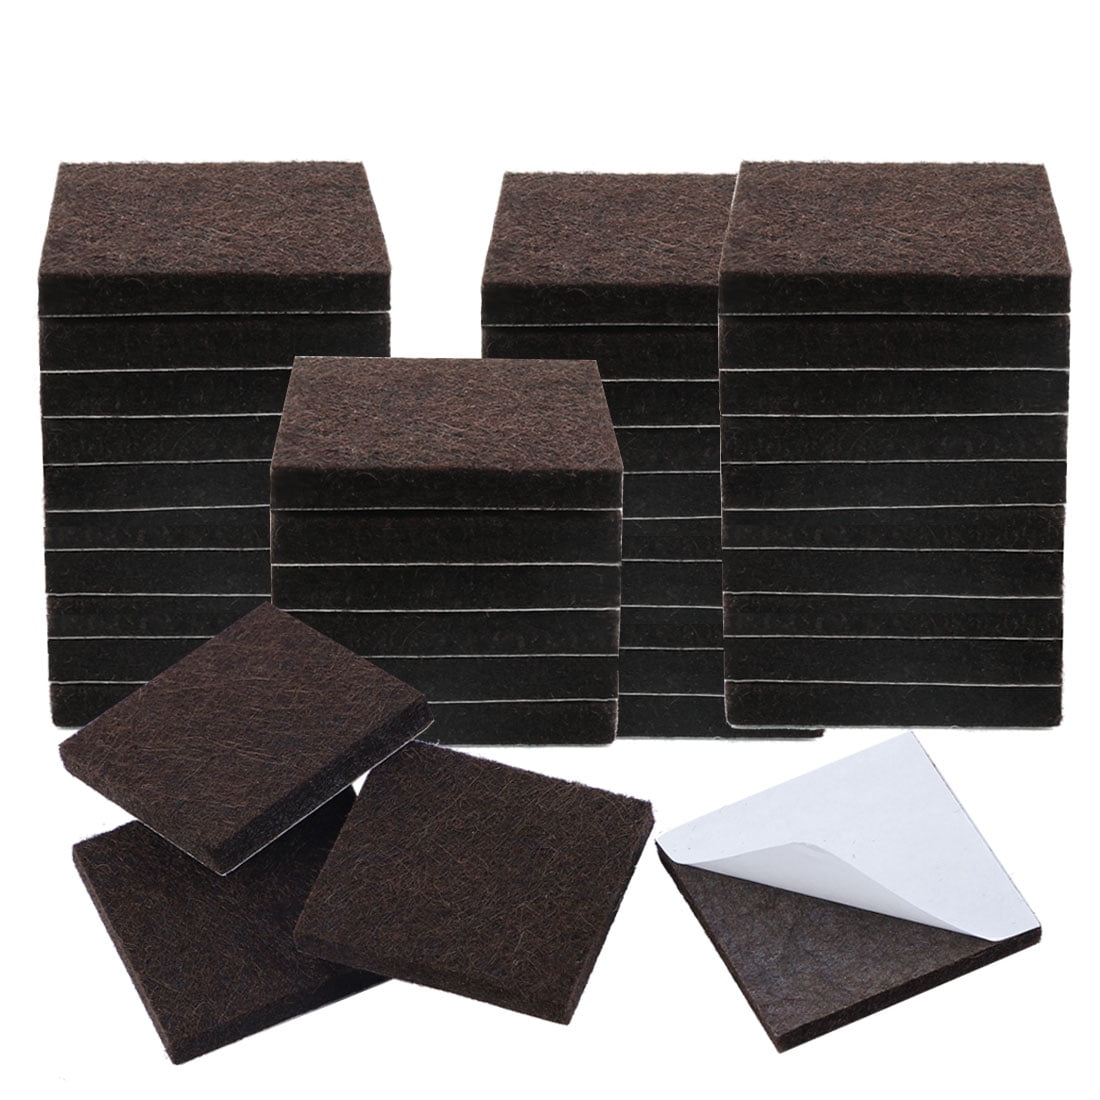 Felt rectangle pads with adhesive backing for glass floor or counter protection 